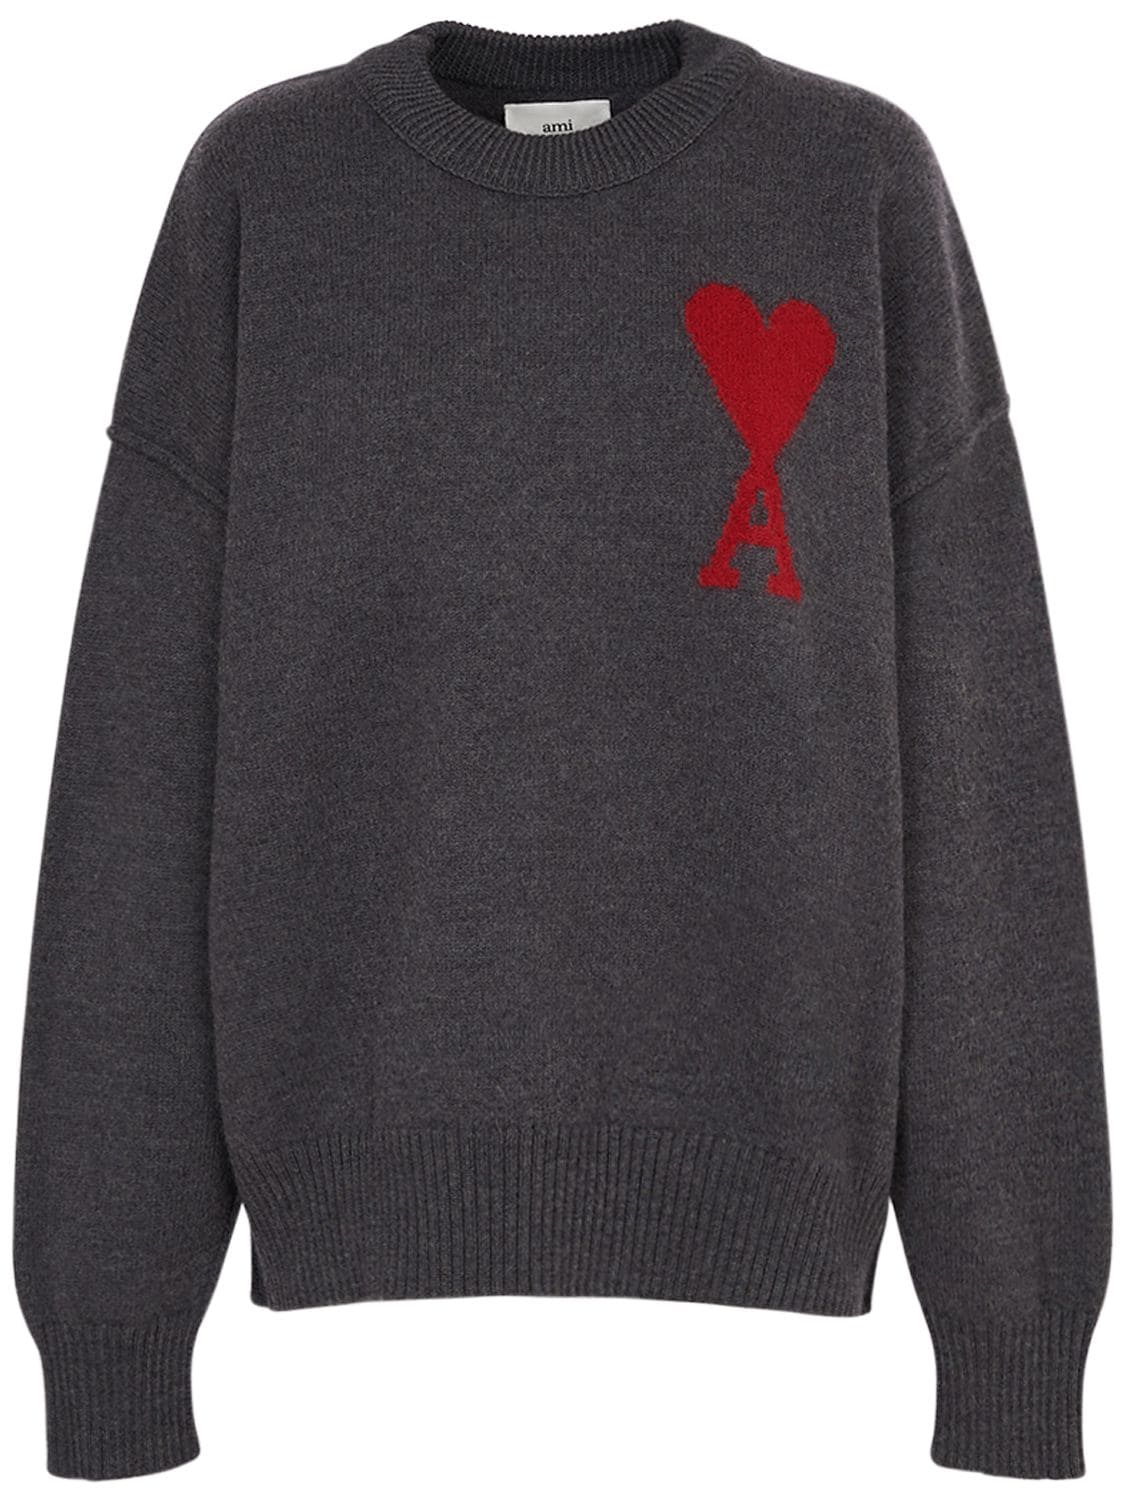 Red Adc Wool Crewneck Sweater – WOMEN > CLOTHING > KNITWEAR